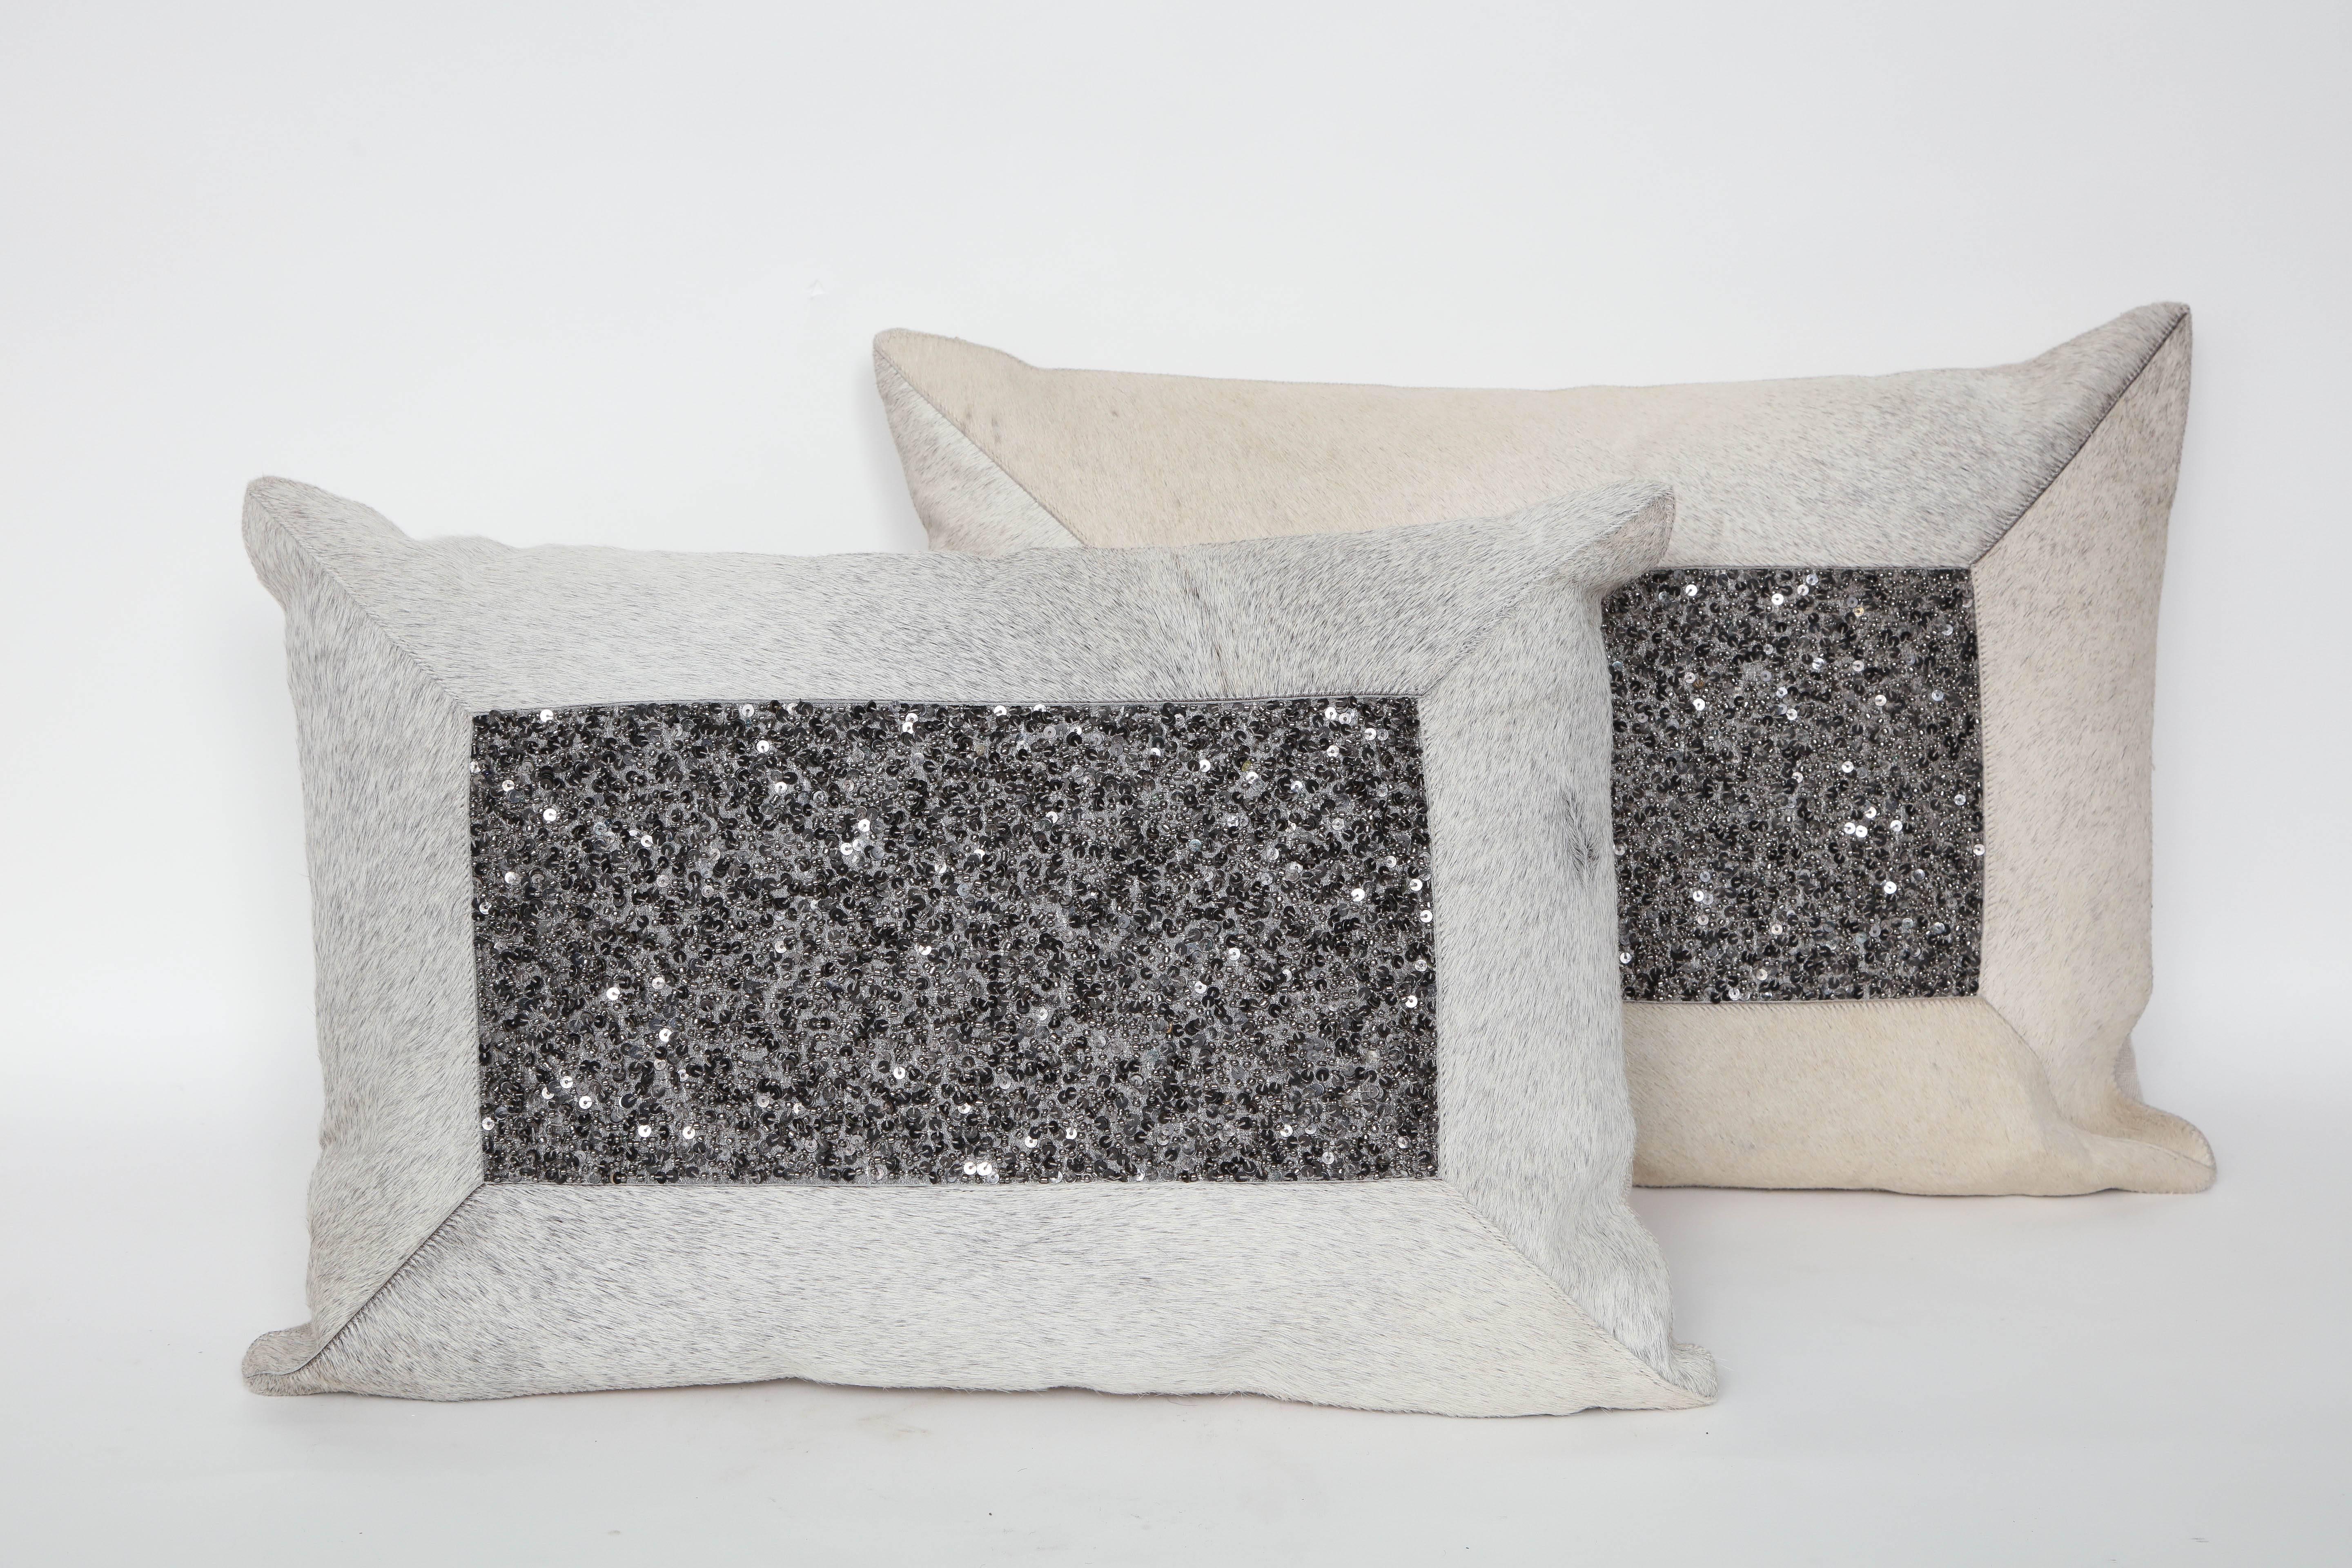 Pair of custom-made rectangular natural white, grey, beige hide pillows accented with grey bead centres and linen cotton backs. Feather down inserts, zipper closure. A sophisticated addition to any interior.